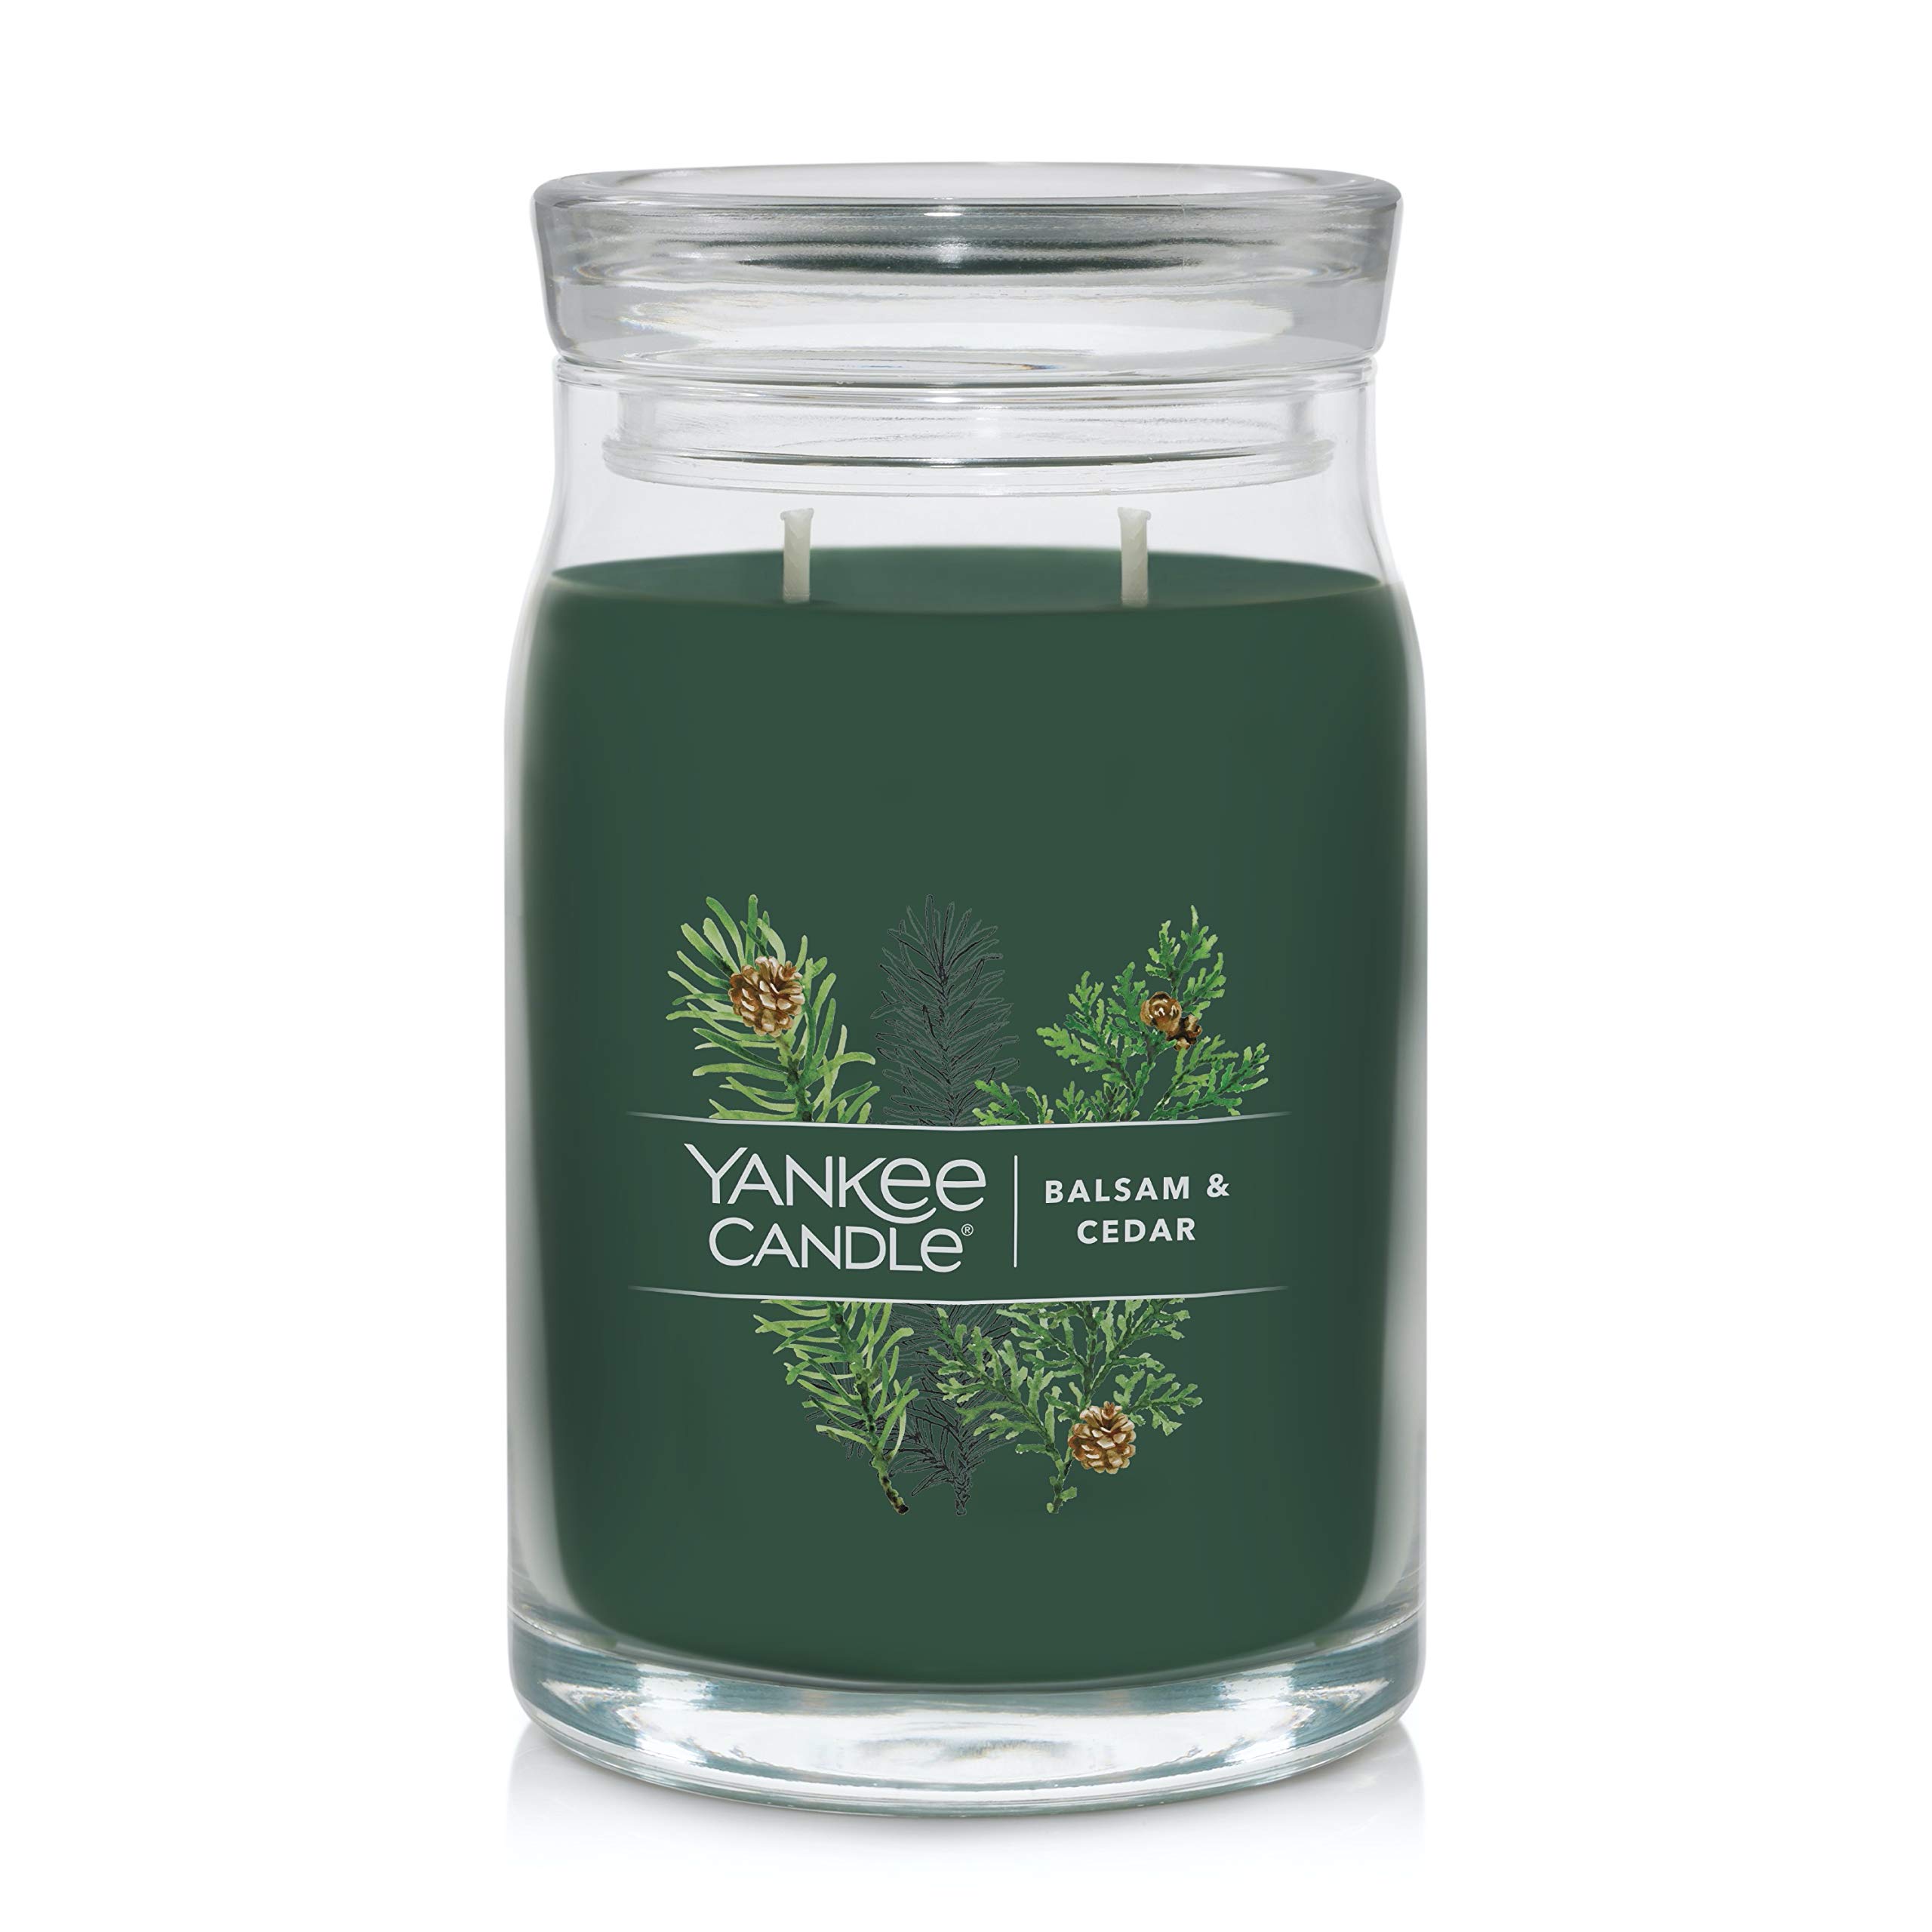 Yankee Candle Balsam & Cedar Scented, Signature 20oz Large Jar 2-Wick Candle, Over 60 Hours of Burn Time, Christmas | Holiday Candle